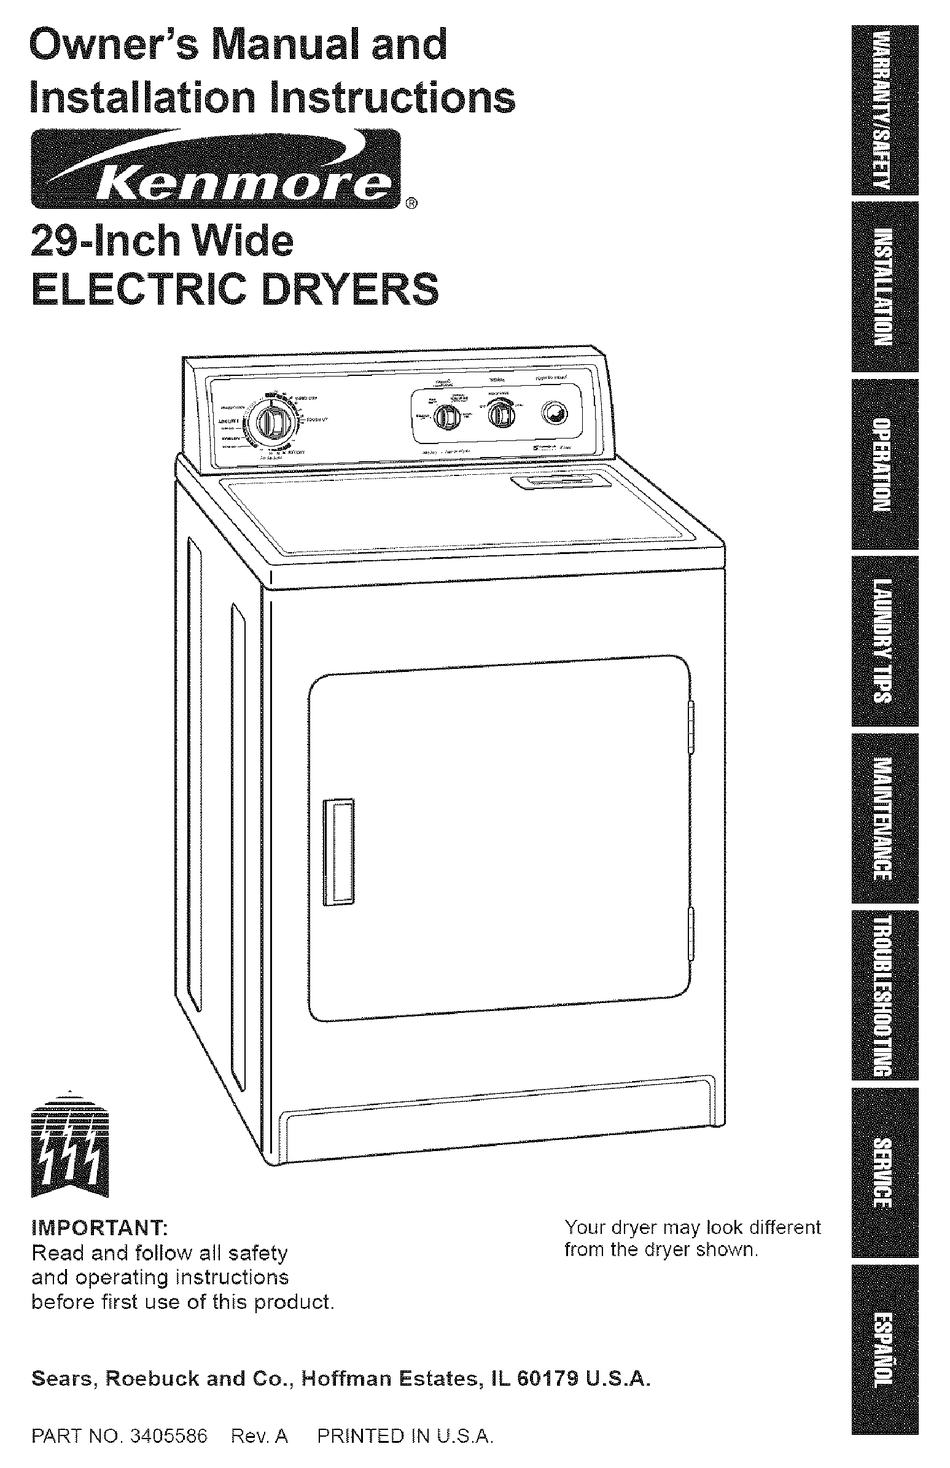 KENMORE 120-VOLT PORTABLE ELECTRIC DRYERS OWNER'S MANUAL AND INSTALLATION  INSTRUCTIONS Pdf Download